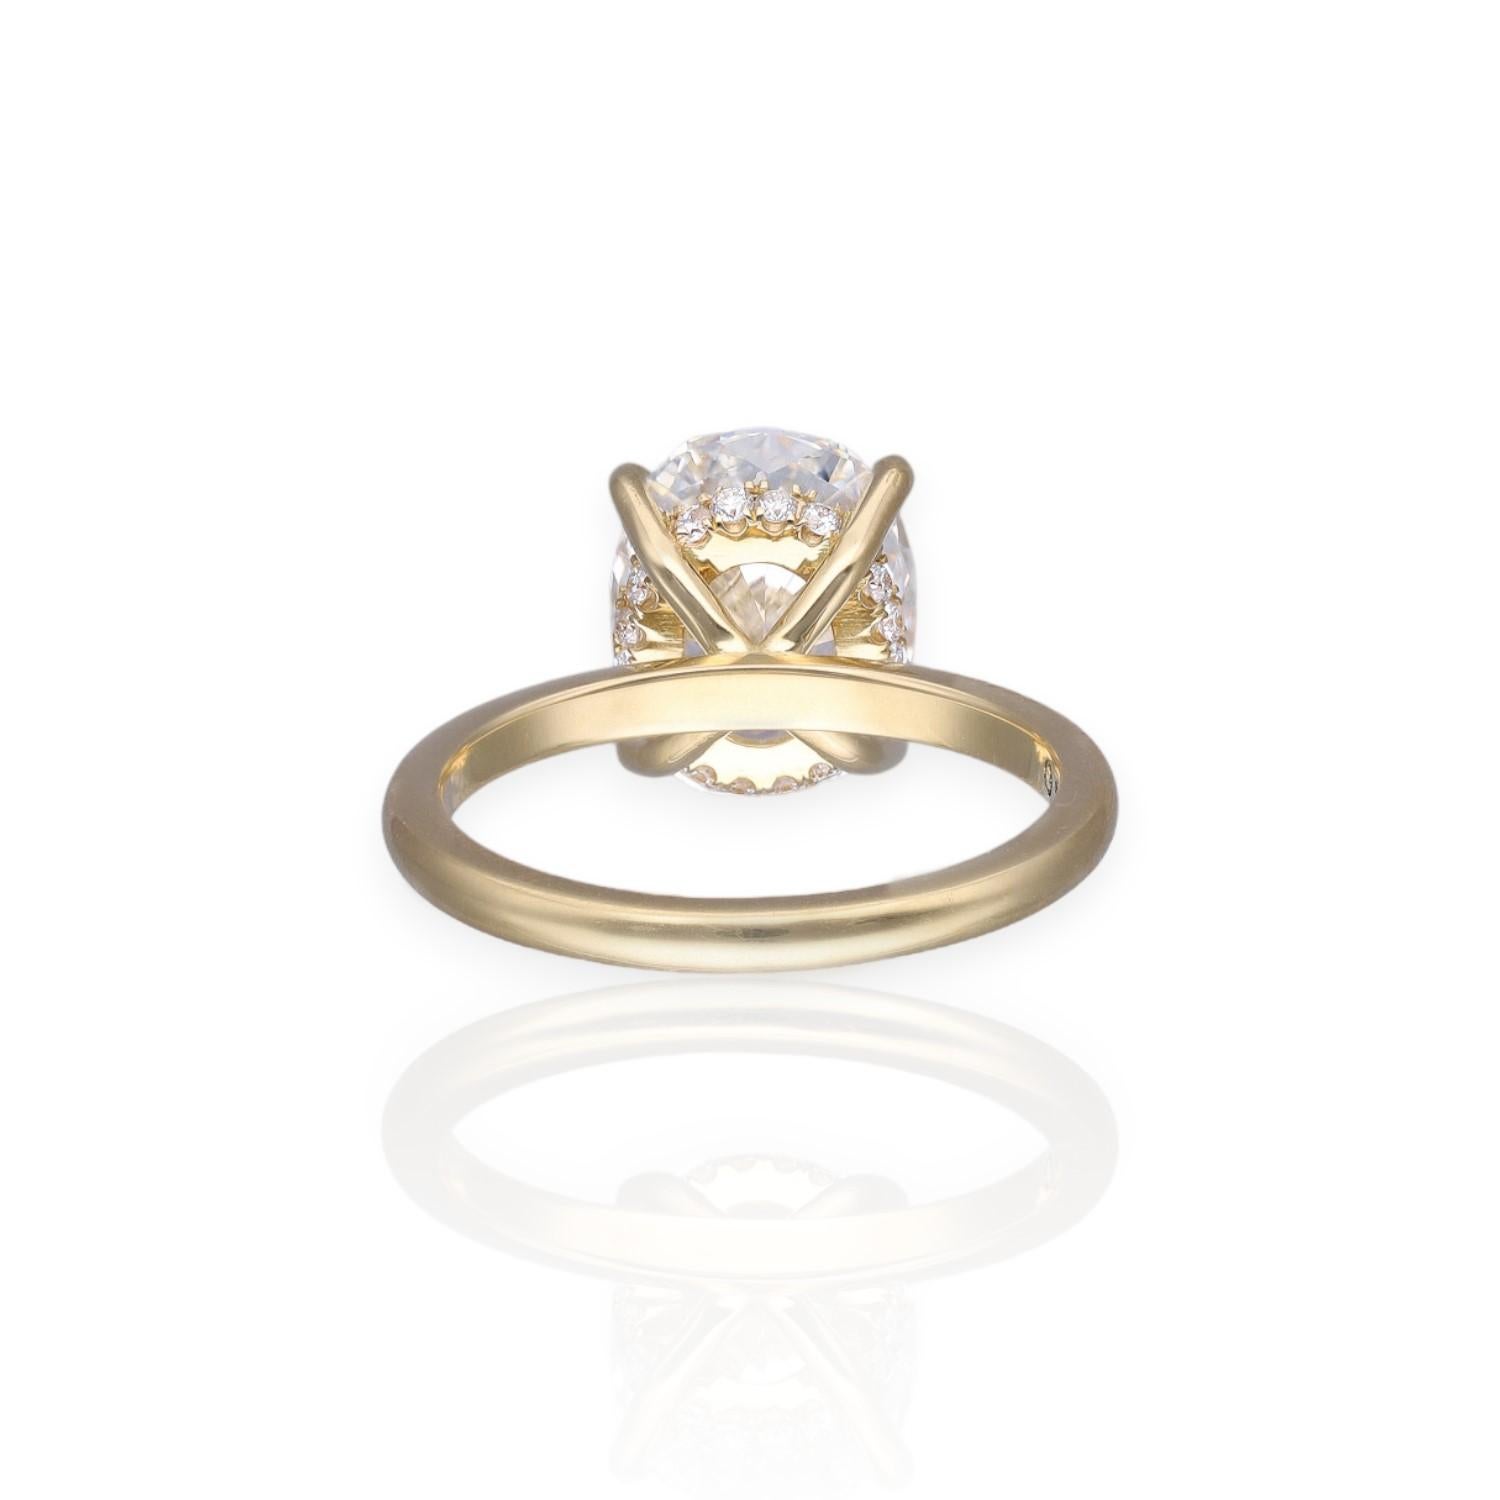 Contemporary Solitare Oval Diamond Ring 4ct GIA Certified For Sale